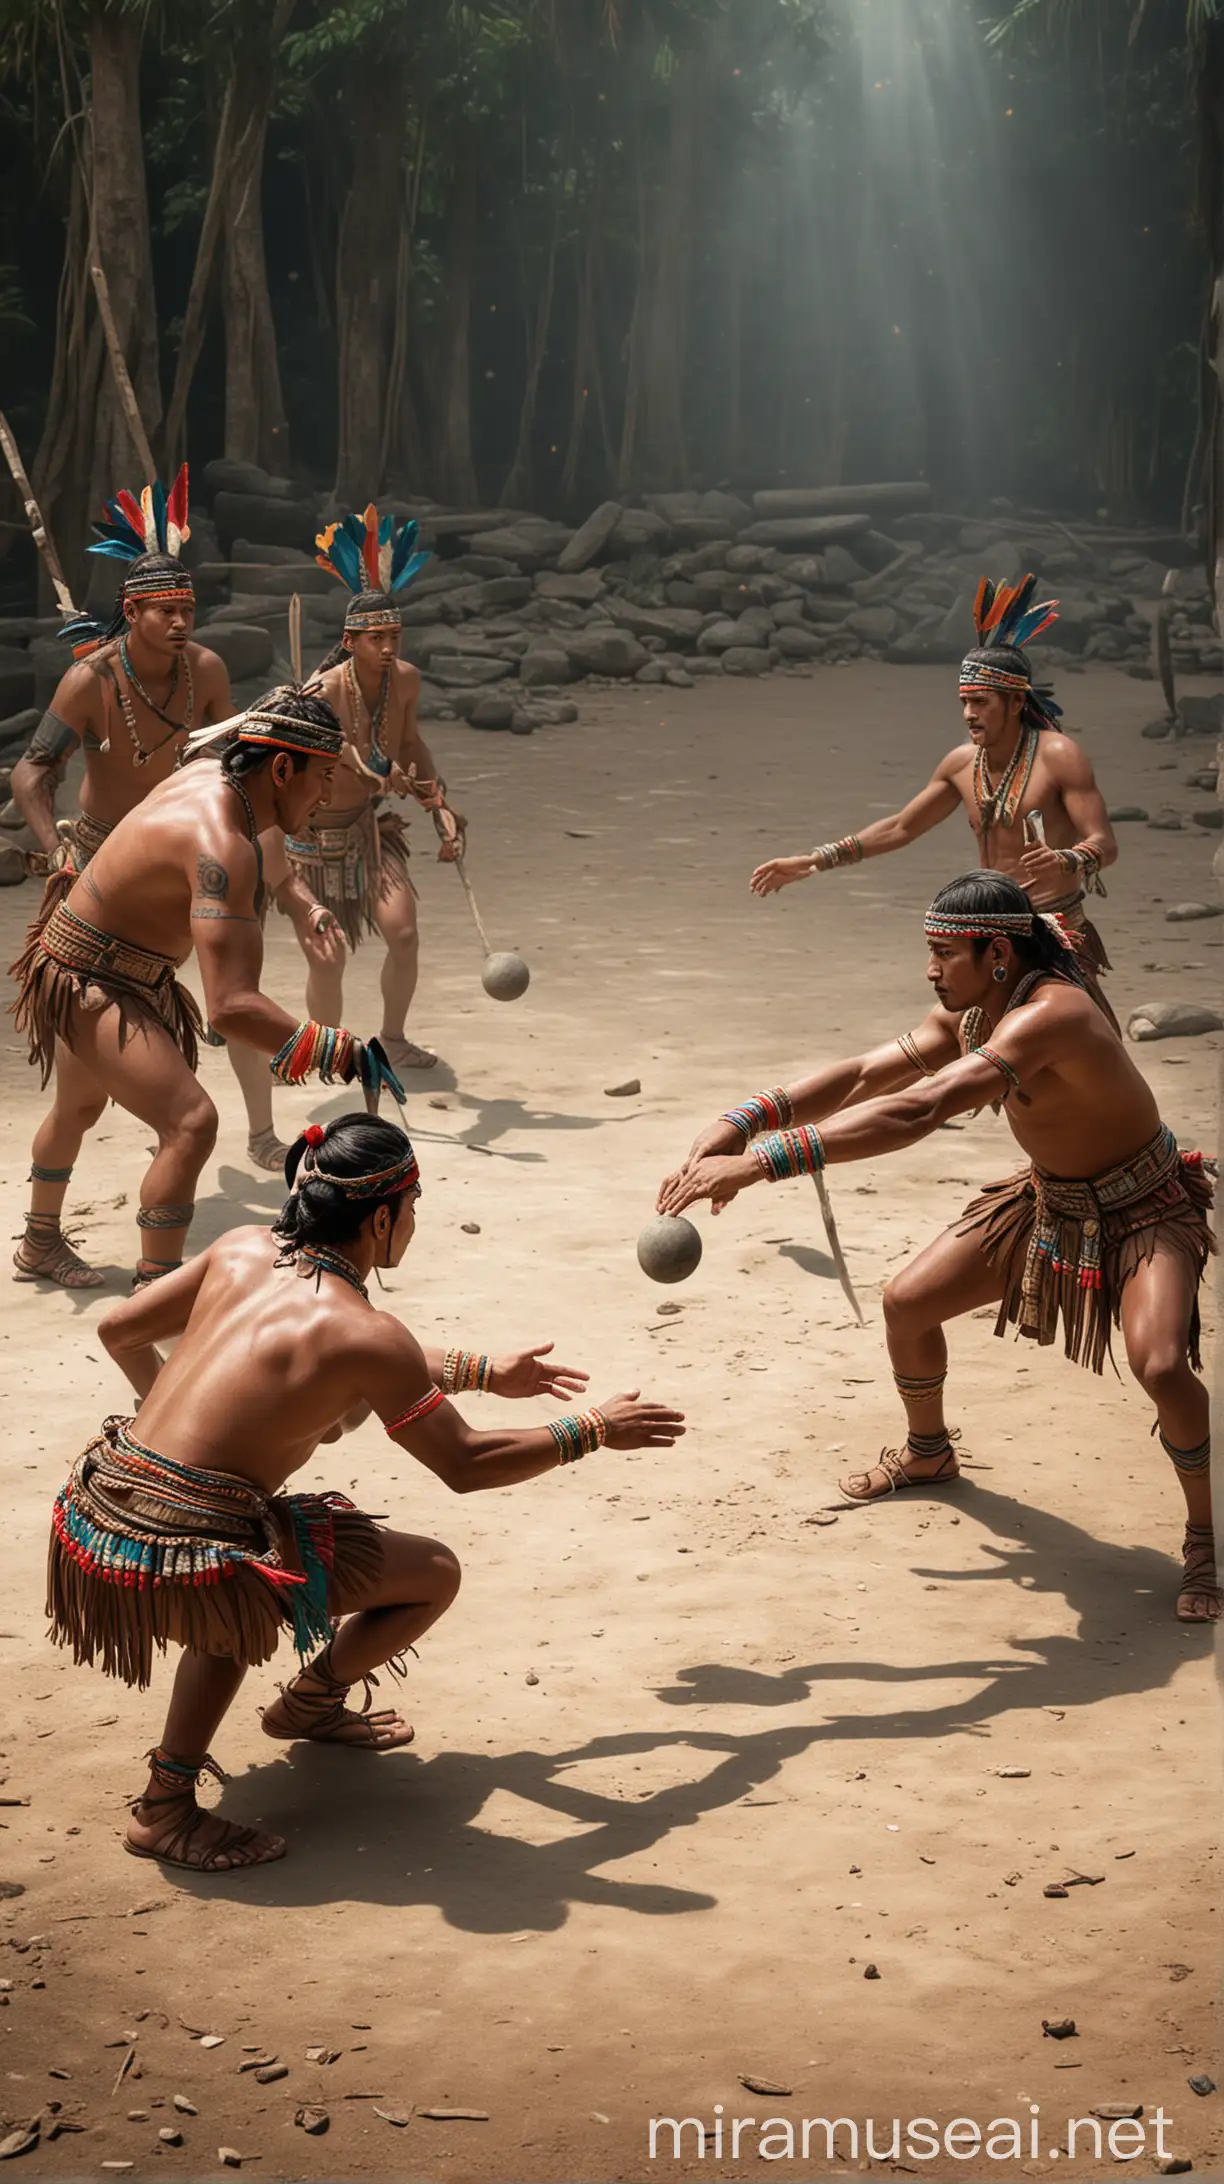 Hyper Realistic Illustration of Mayan Pokotar Game Players Passing Ball through Ring with Hips and Knees